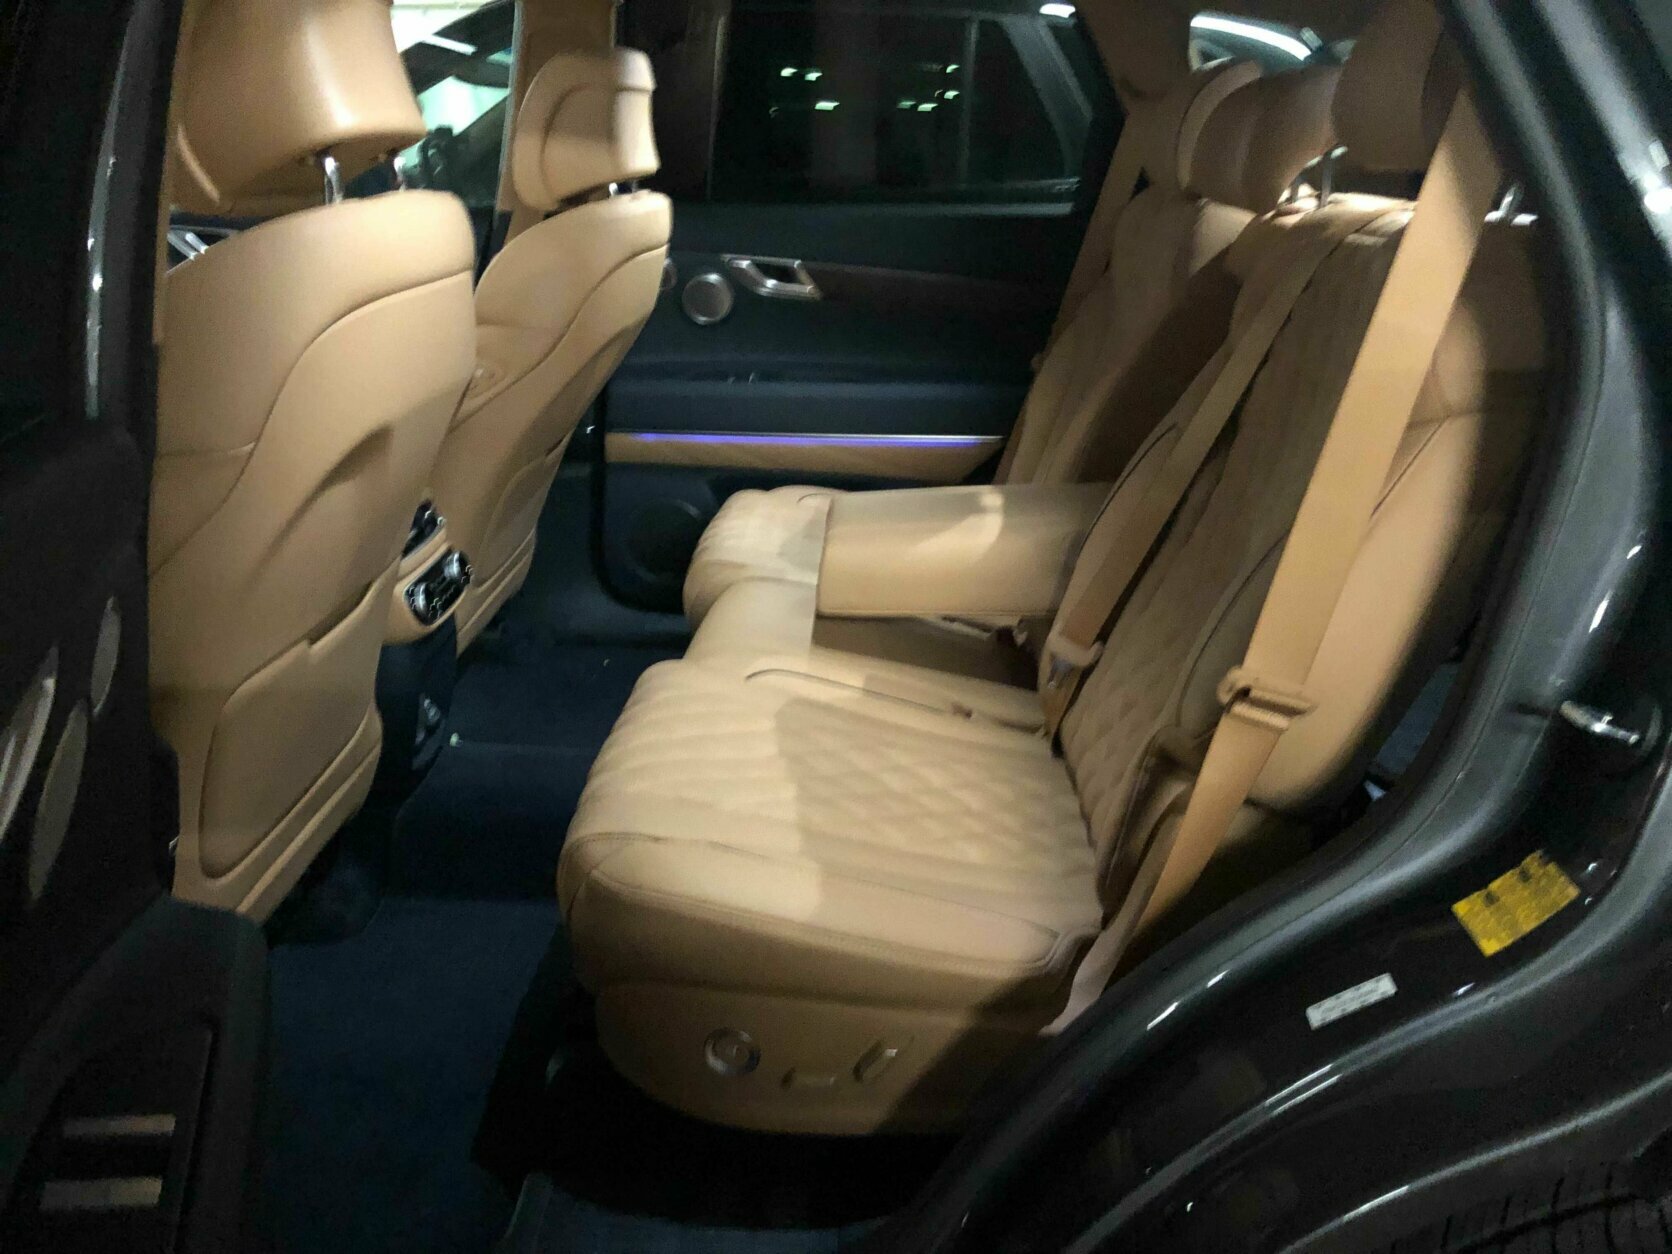 <p>GV80 models are available with two or three rows. My model came with five seats and plenty of space for people and gear.</p>
